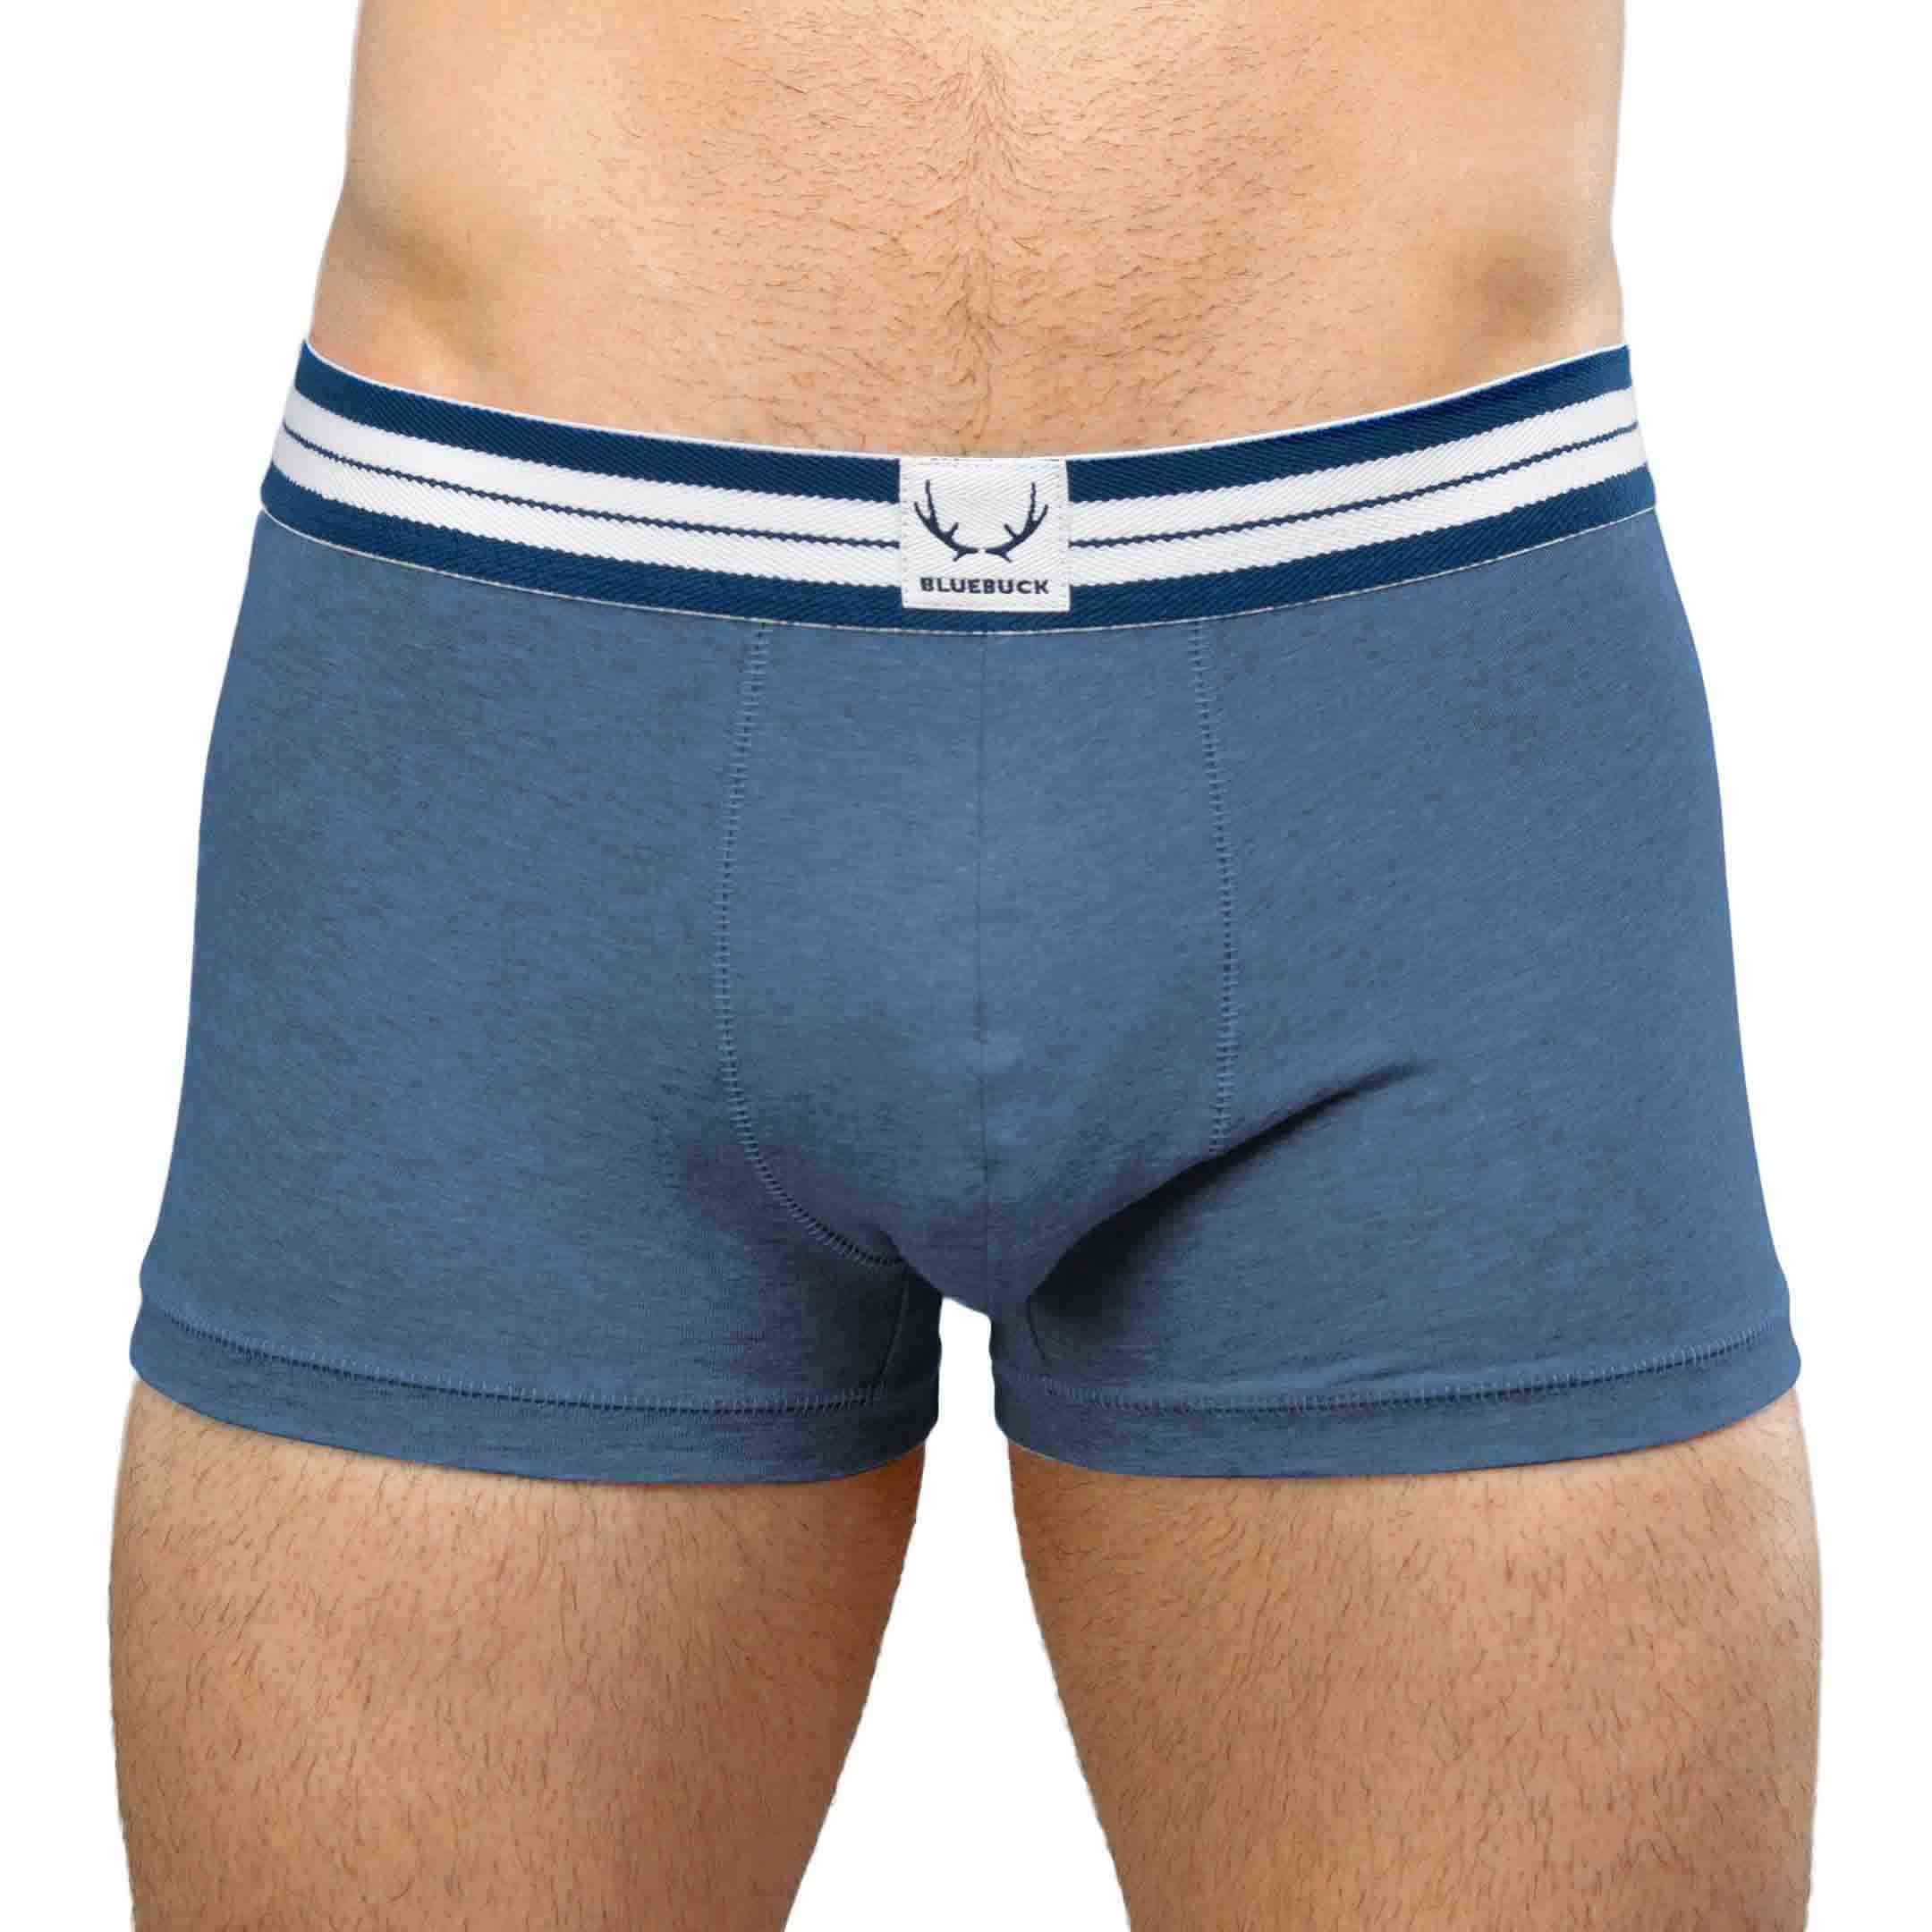 Blue boxer shorts made from organic cotton from Bluebuck